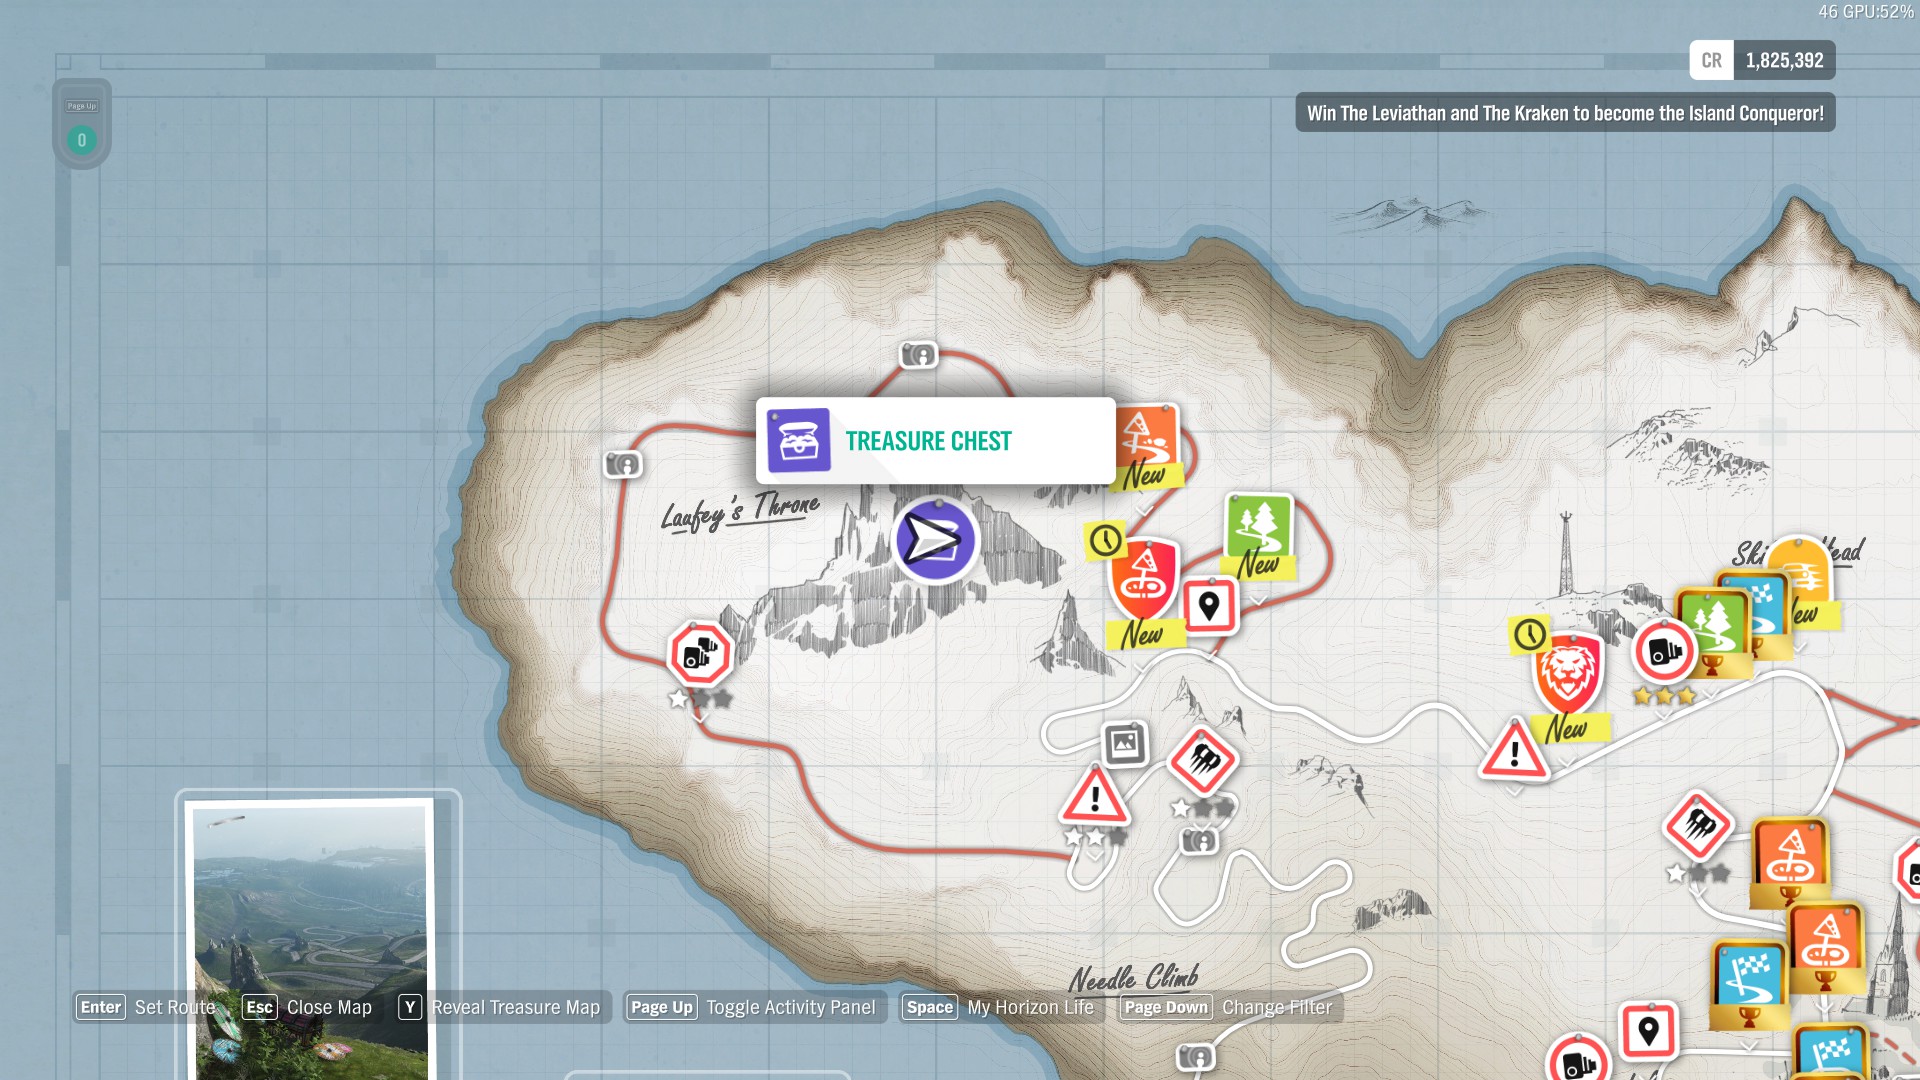 Forza Horizon 4 - Fortune Island : All Riddles and Treasure Chest Locations